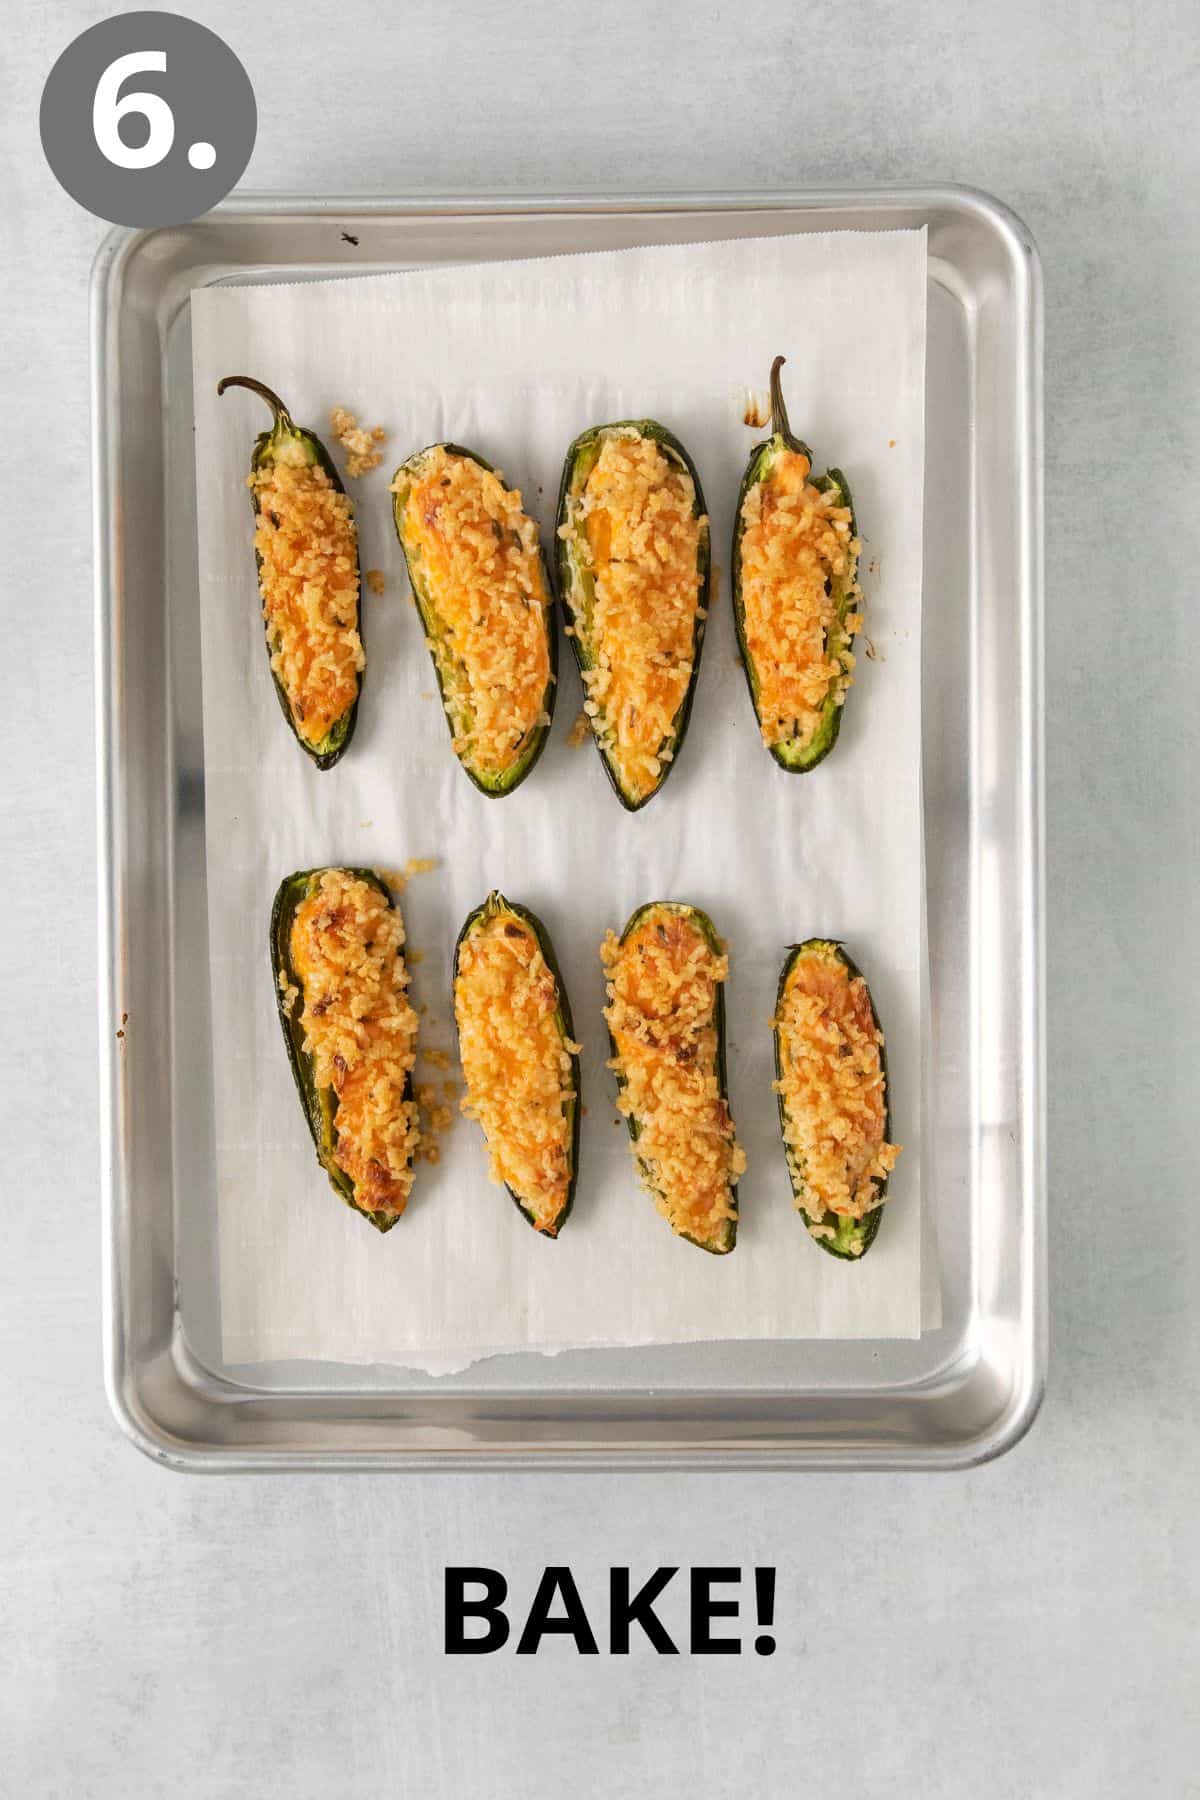 Baked jalapeno poppers on a baking sheet